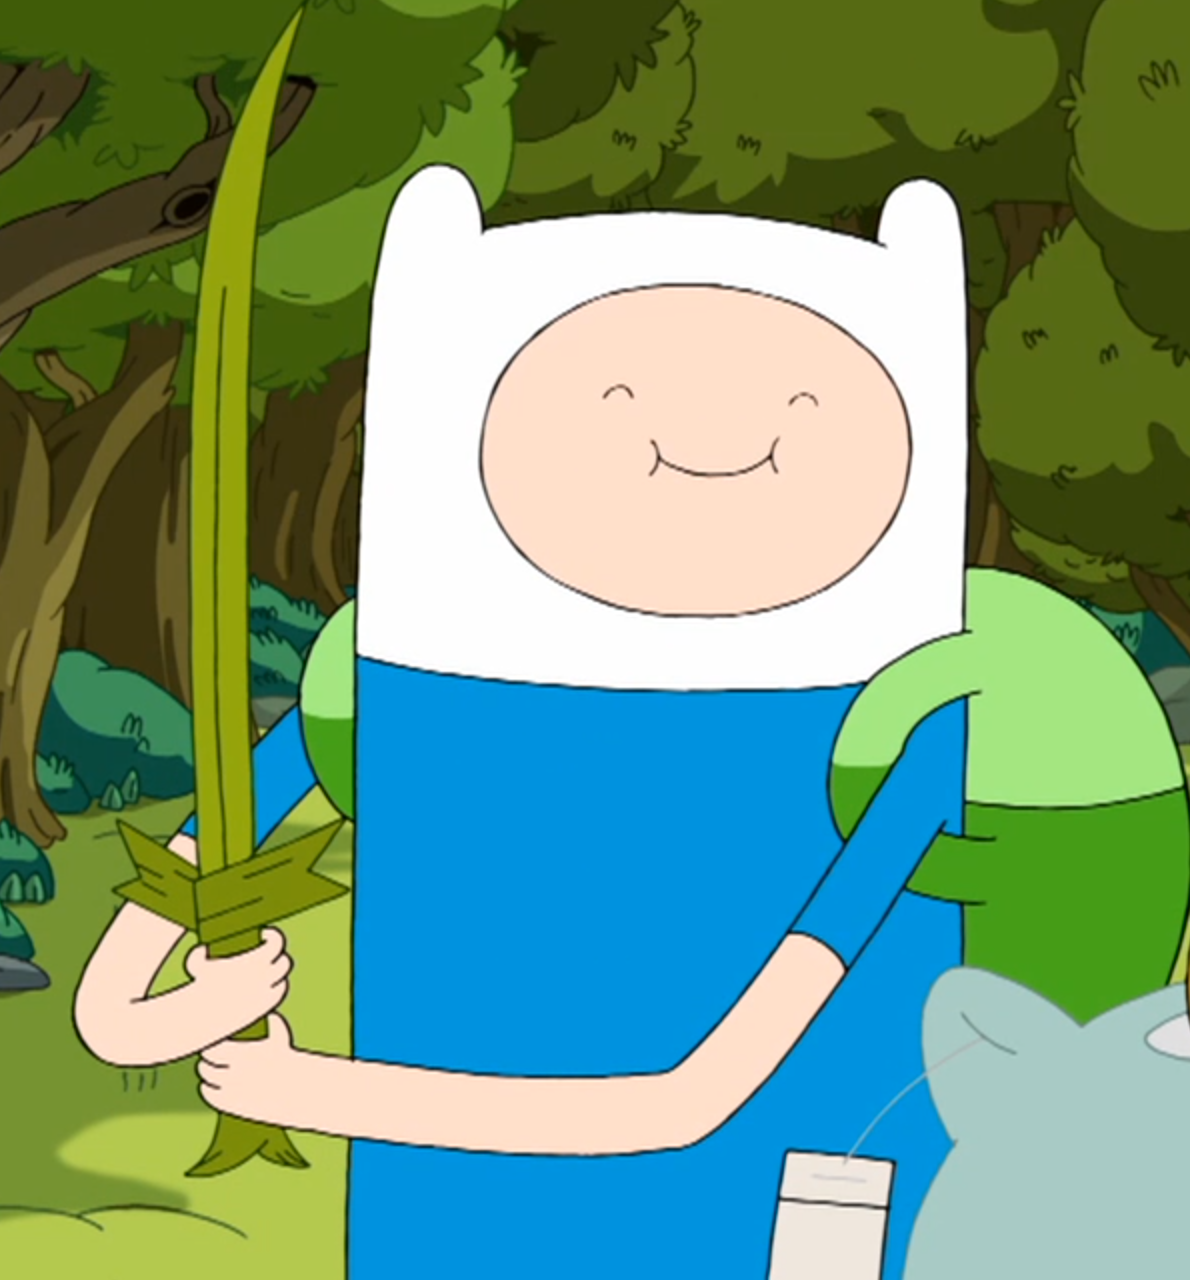 Image S5e45 Finn Smiling With Sword Png Adventure Time Wiki Fandom Powered By Wikia